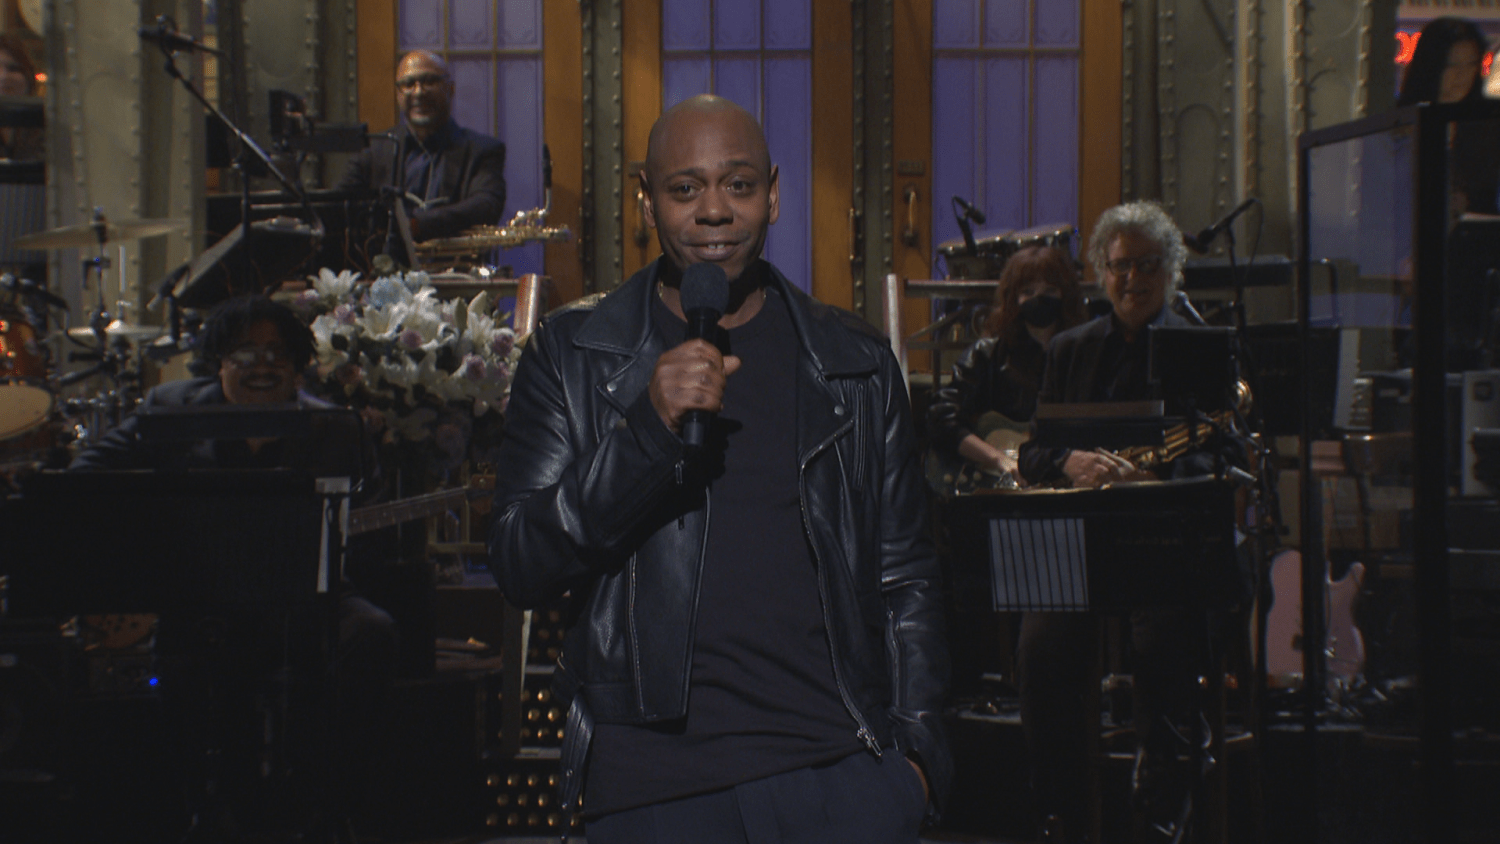 Dave Chappelle, hosting ‘SNL’ for the third time, jokes about Ye’s antisemitic comments and Herschel Walker